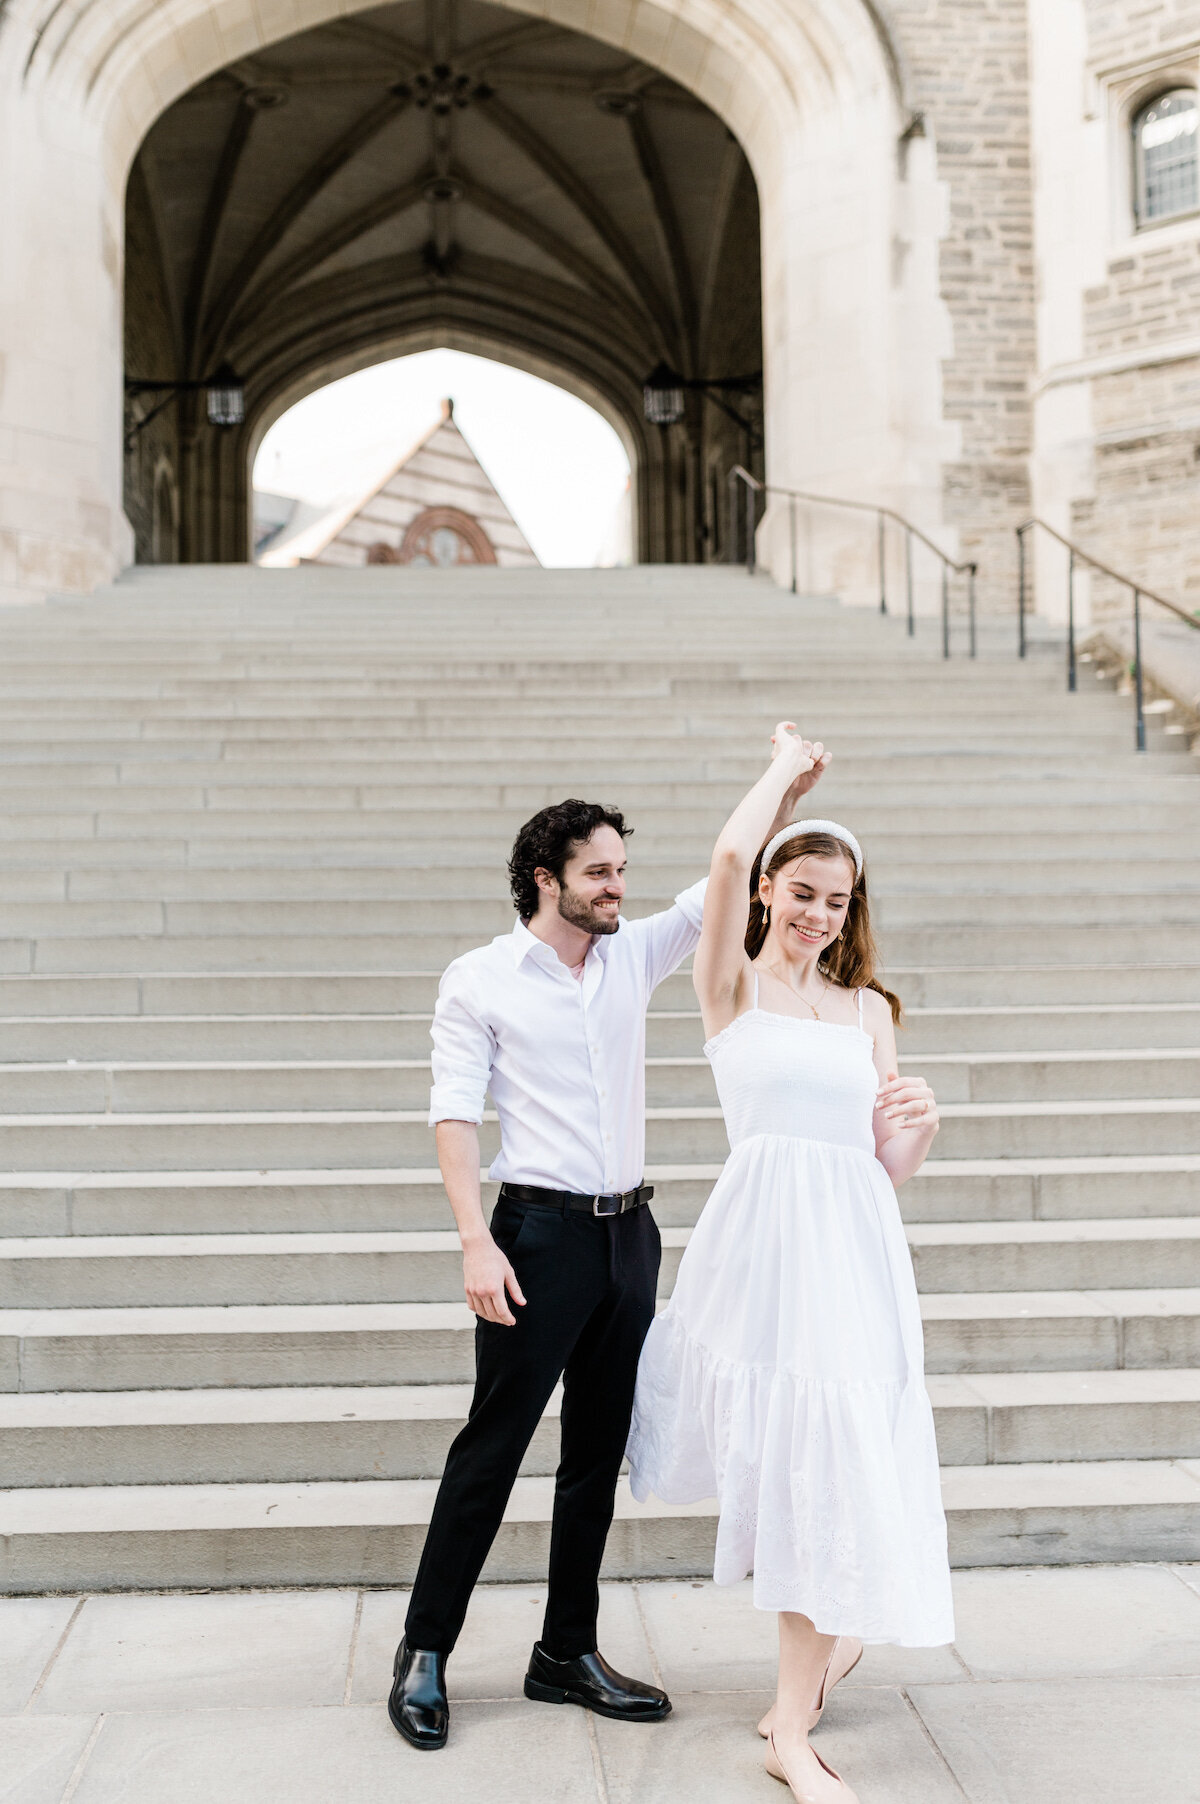 Elevate your engagement memories with the artful touch of our luxury sessions. Our editorial aesthetic transforms your love story into a visual narrative, highlighting both genuine emotions and curated elegance.